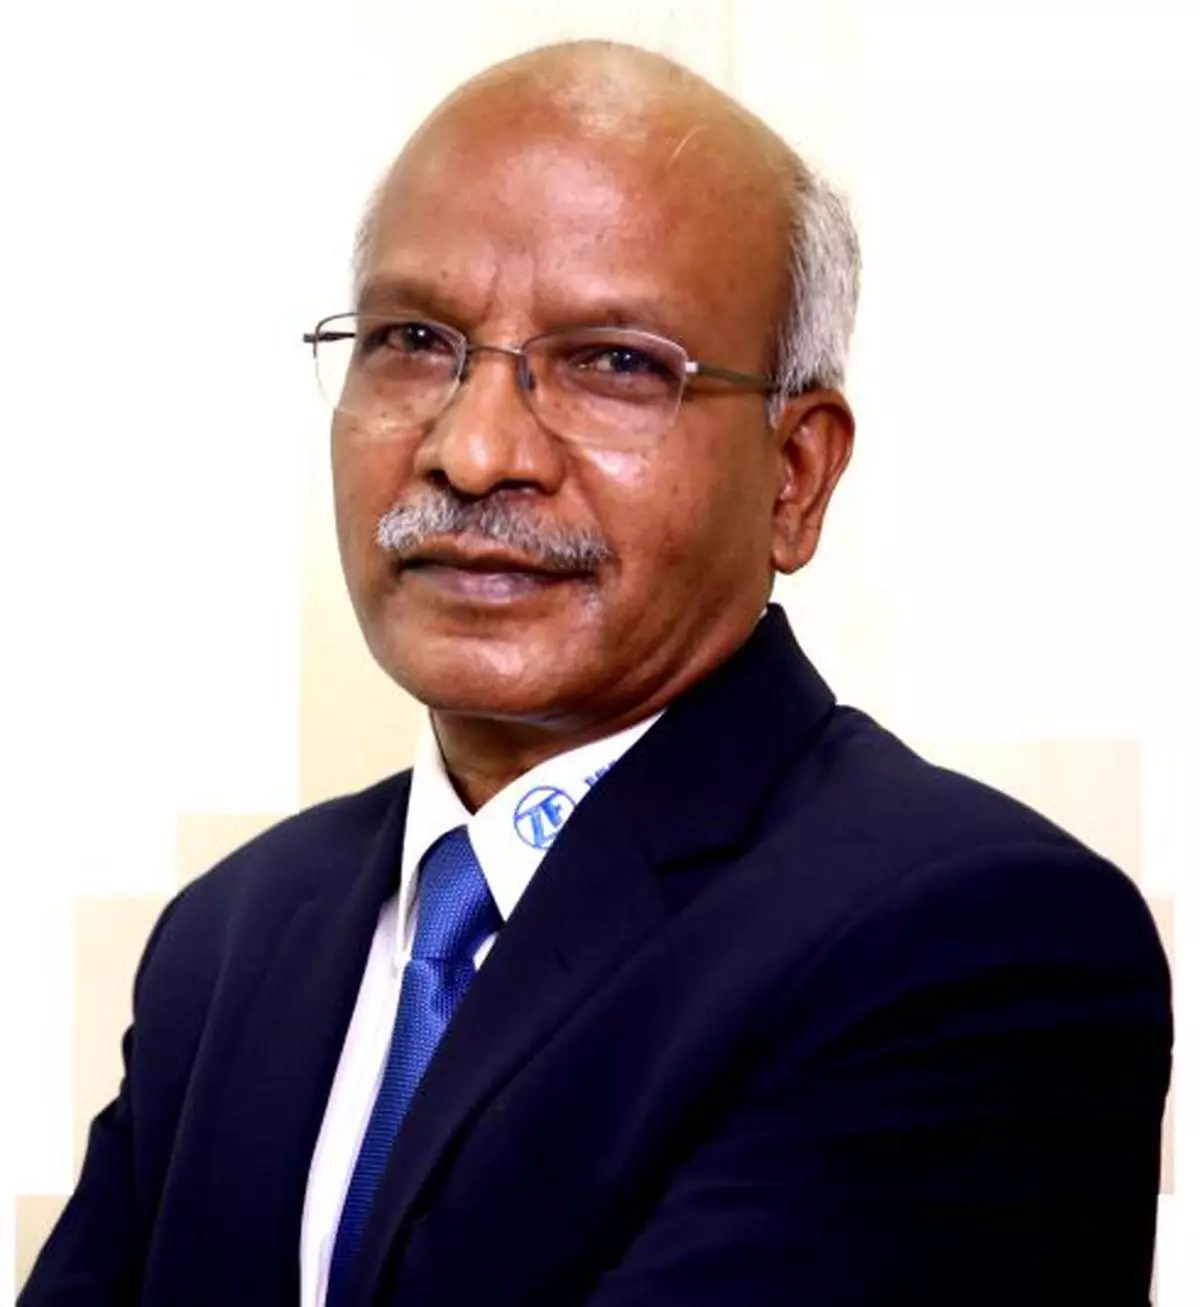  P Kaniappan, Managing Director, ZF Commercial Vehicle Control Systems India